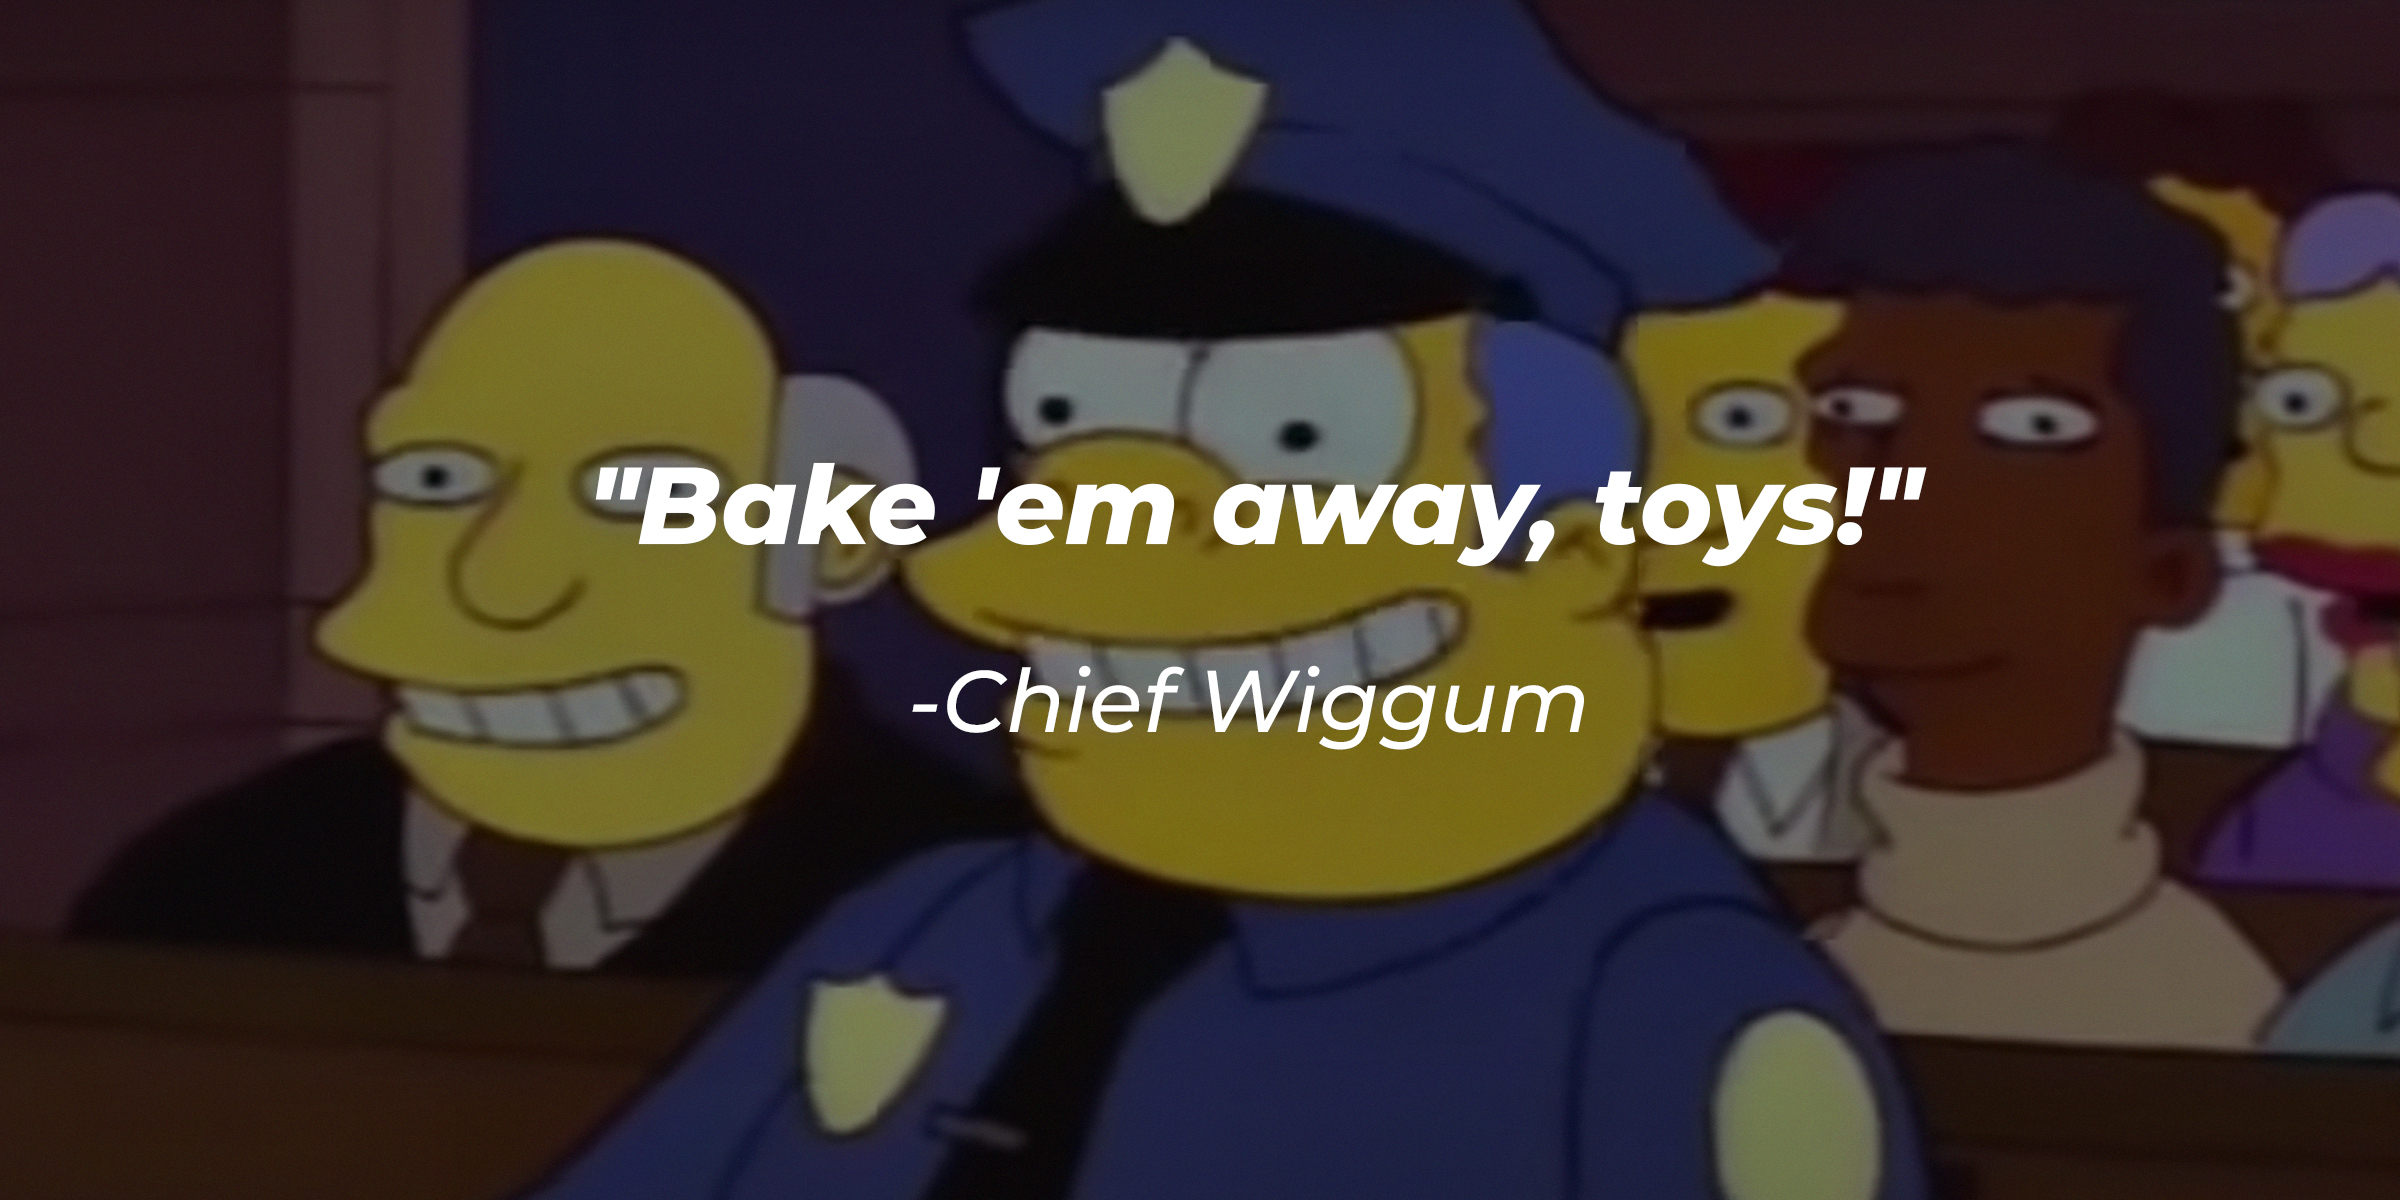 Chief Wiggum with his quote: "Bake 'em away, toys!" | Source: facebook.com/TheSimpsons